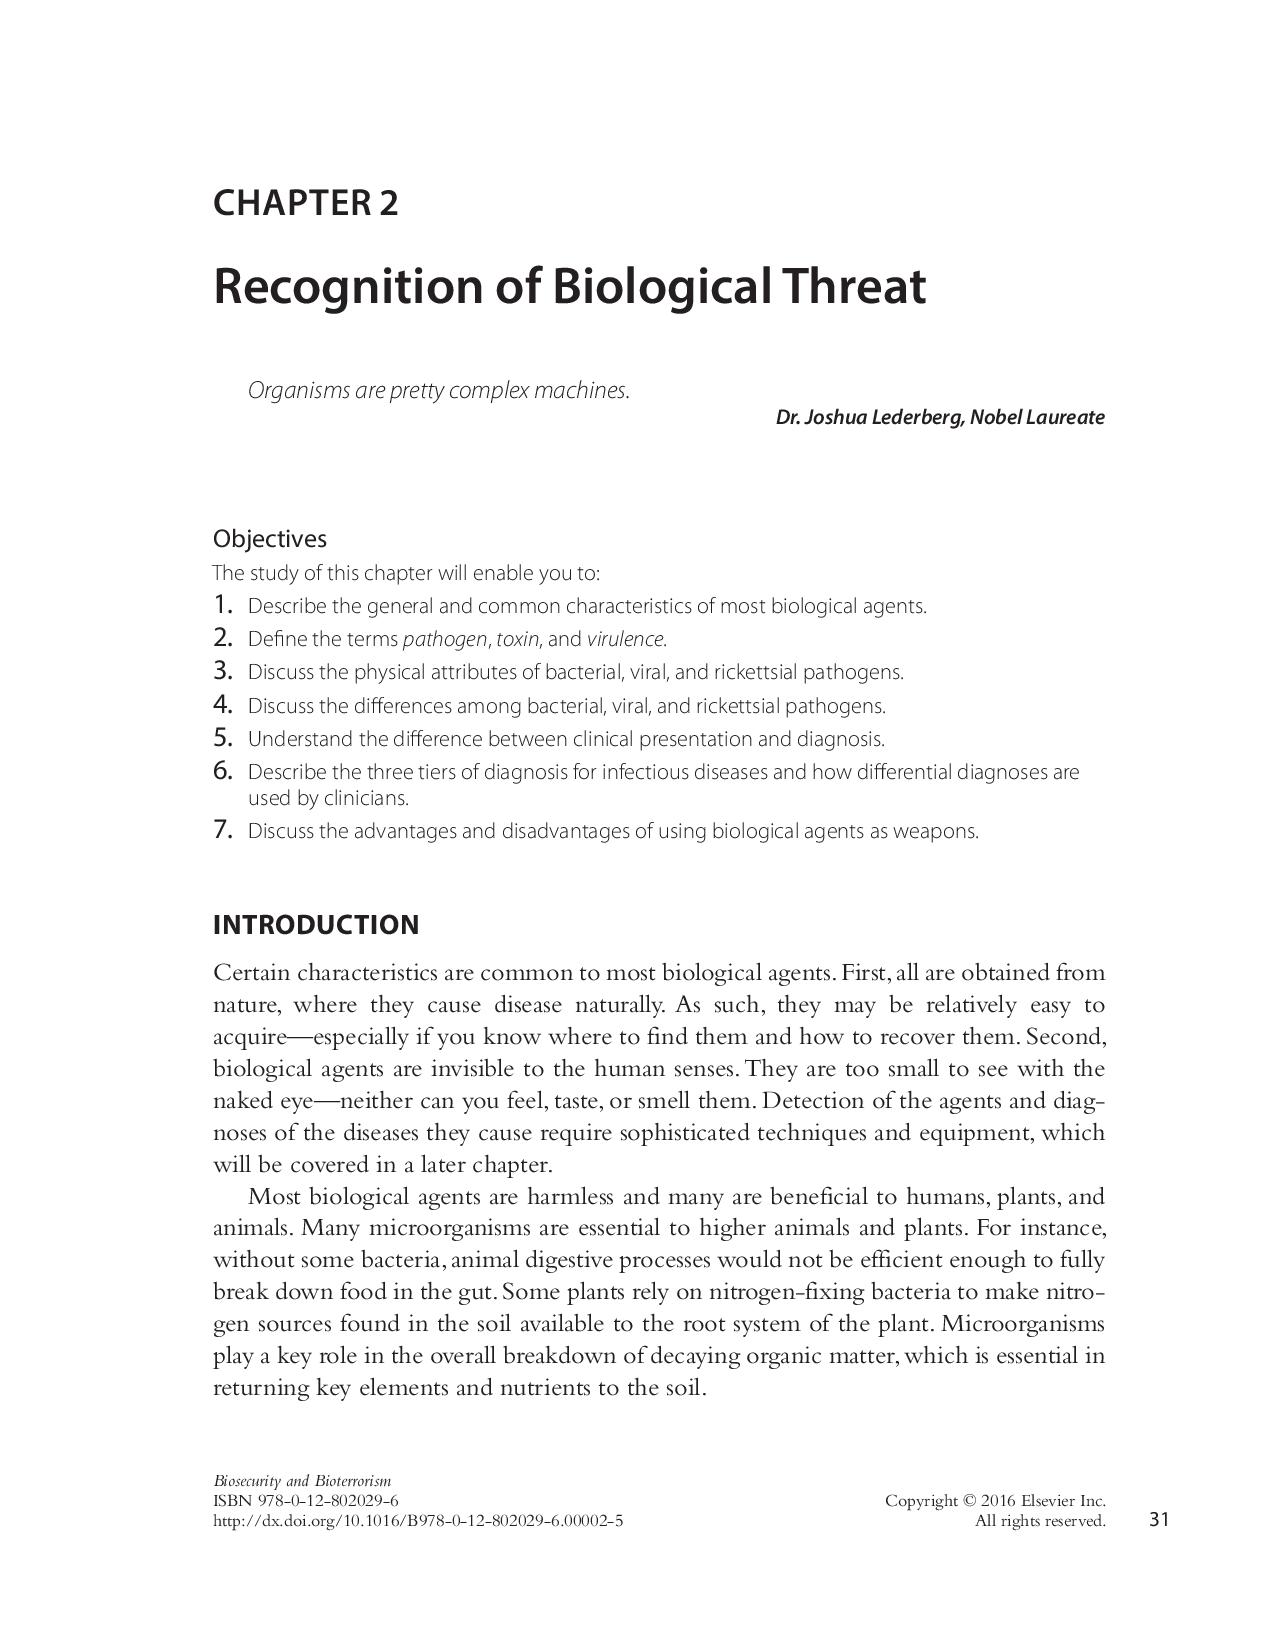 Recognition of Biological Threat